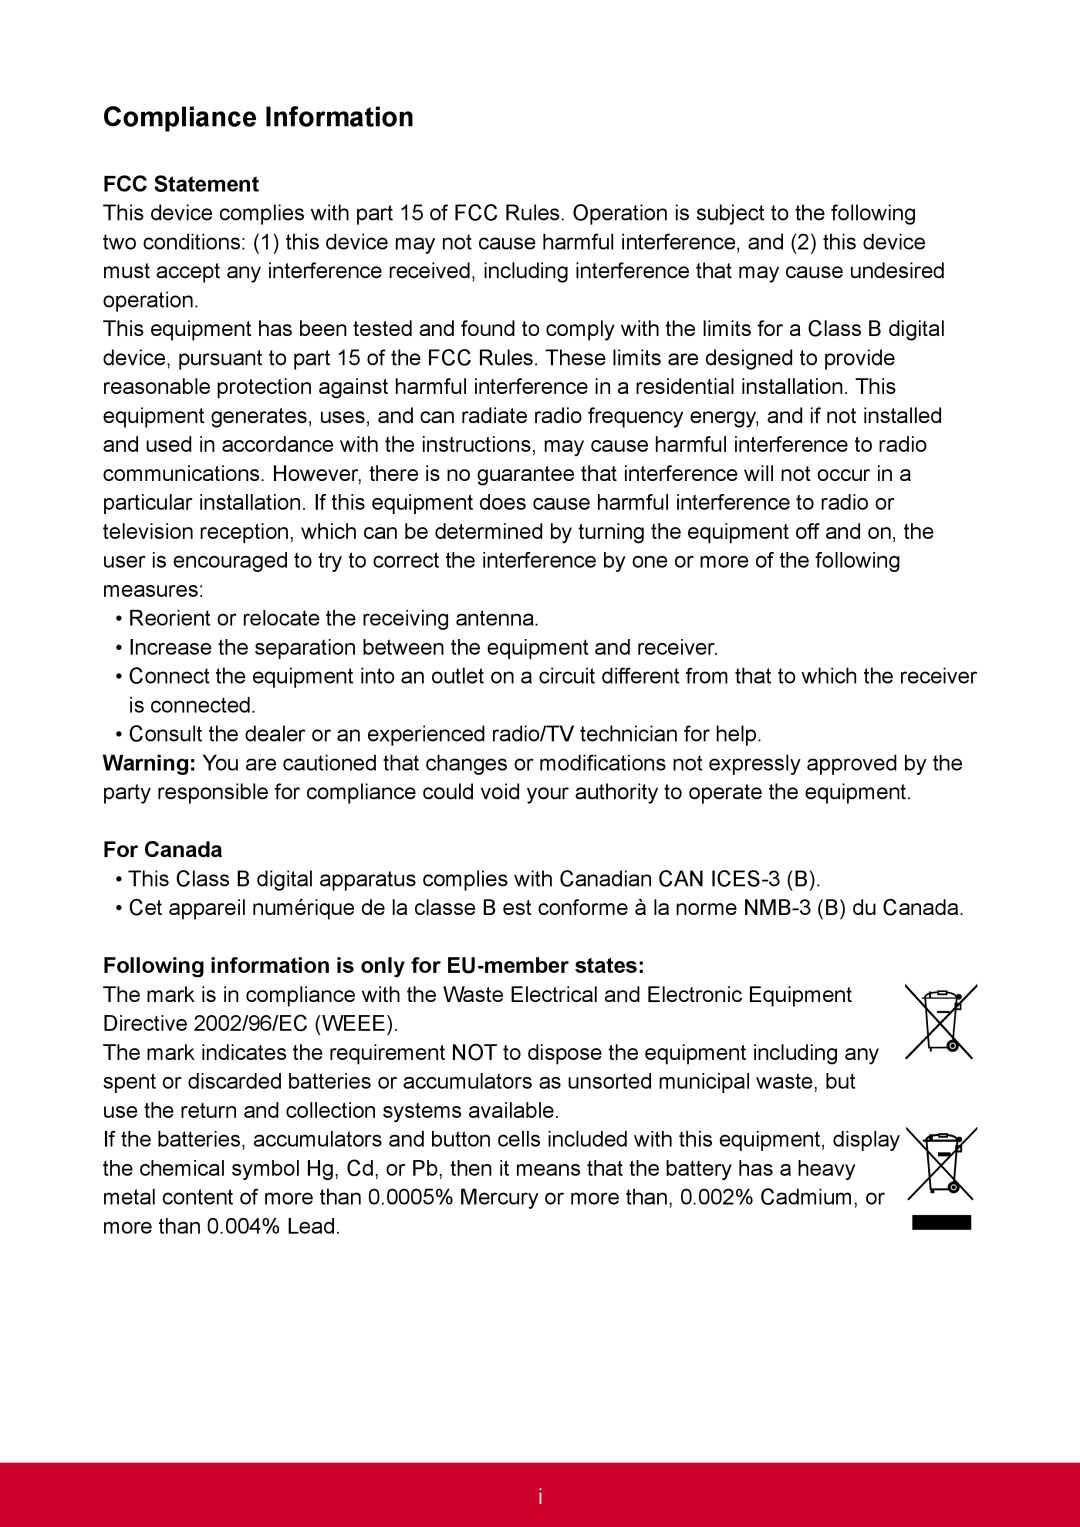 ViewSonic SCZ55BKUS0 Compliance Information, FCC Statement, For Canada, Following information is only for EU-member states 